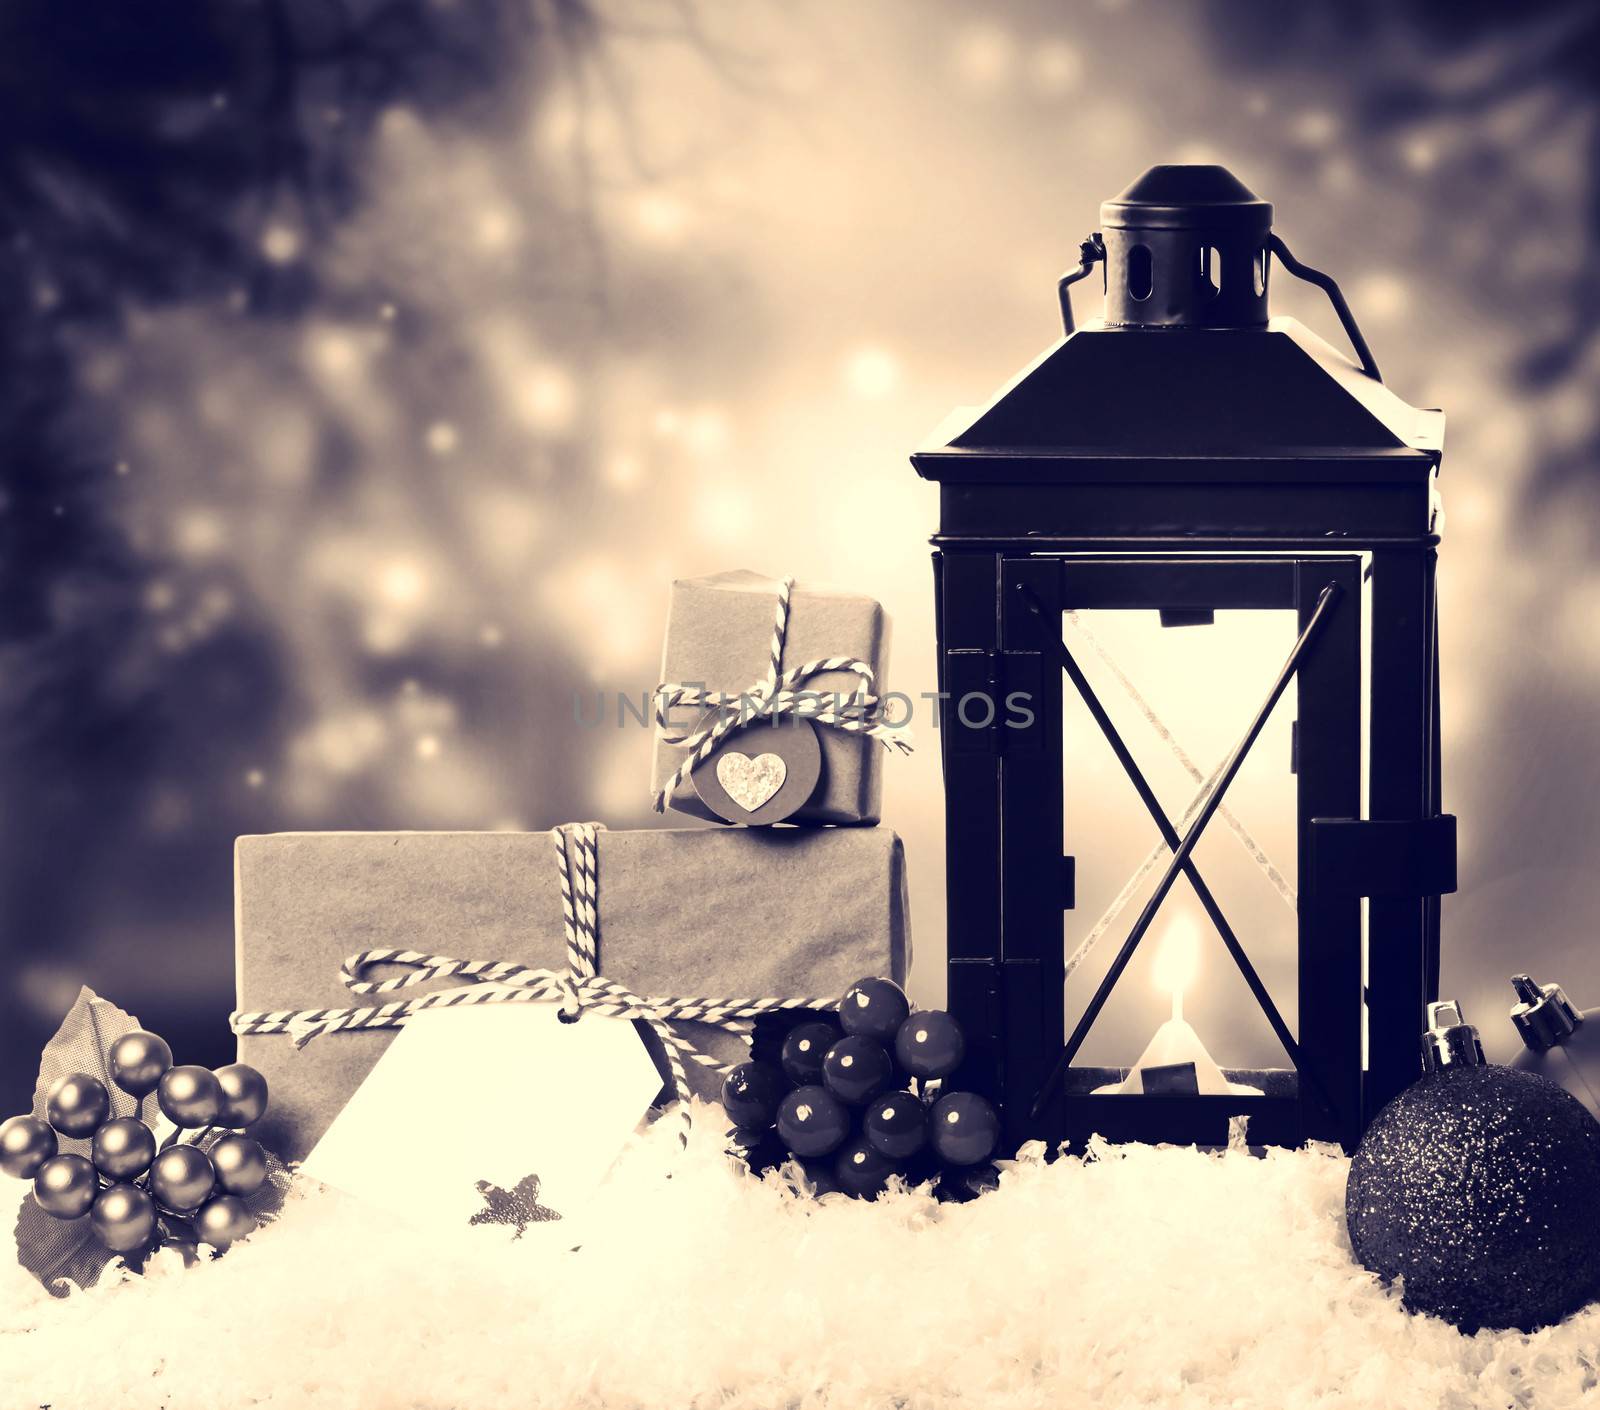 Christmas lantern with ornaments and presents  by melpomene